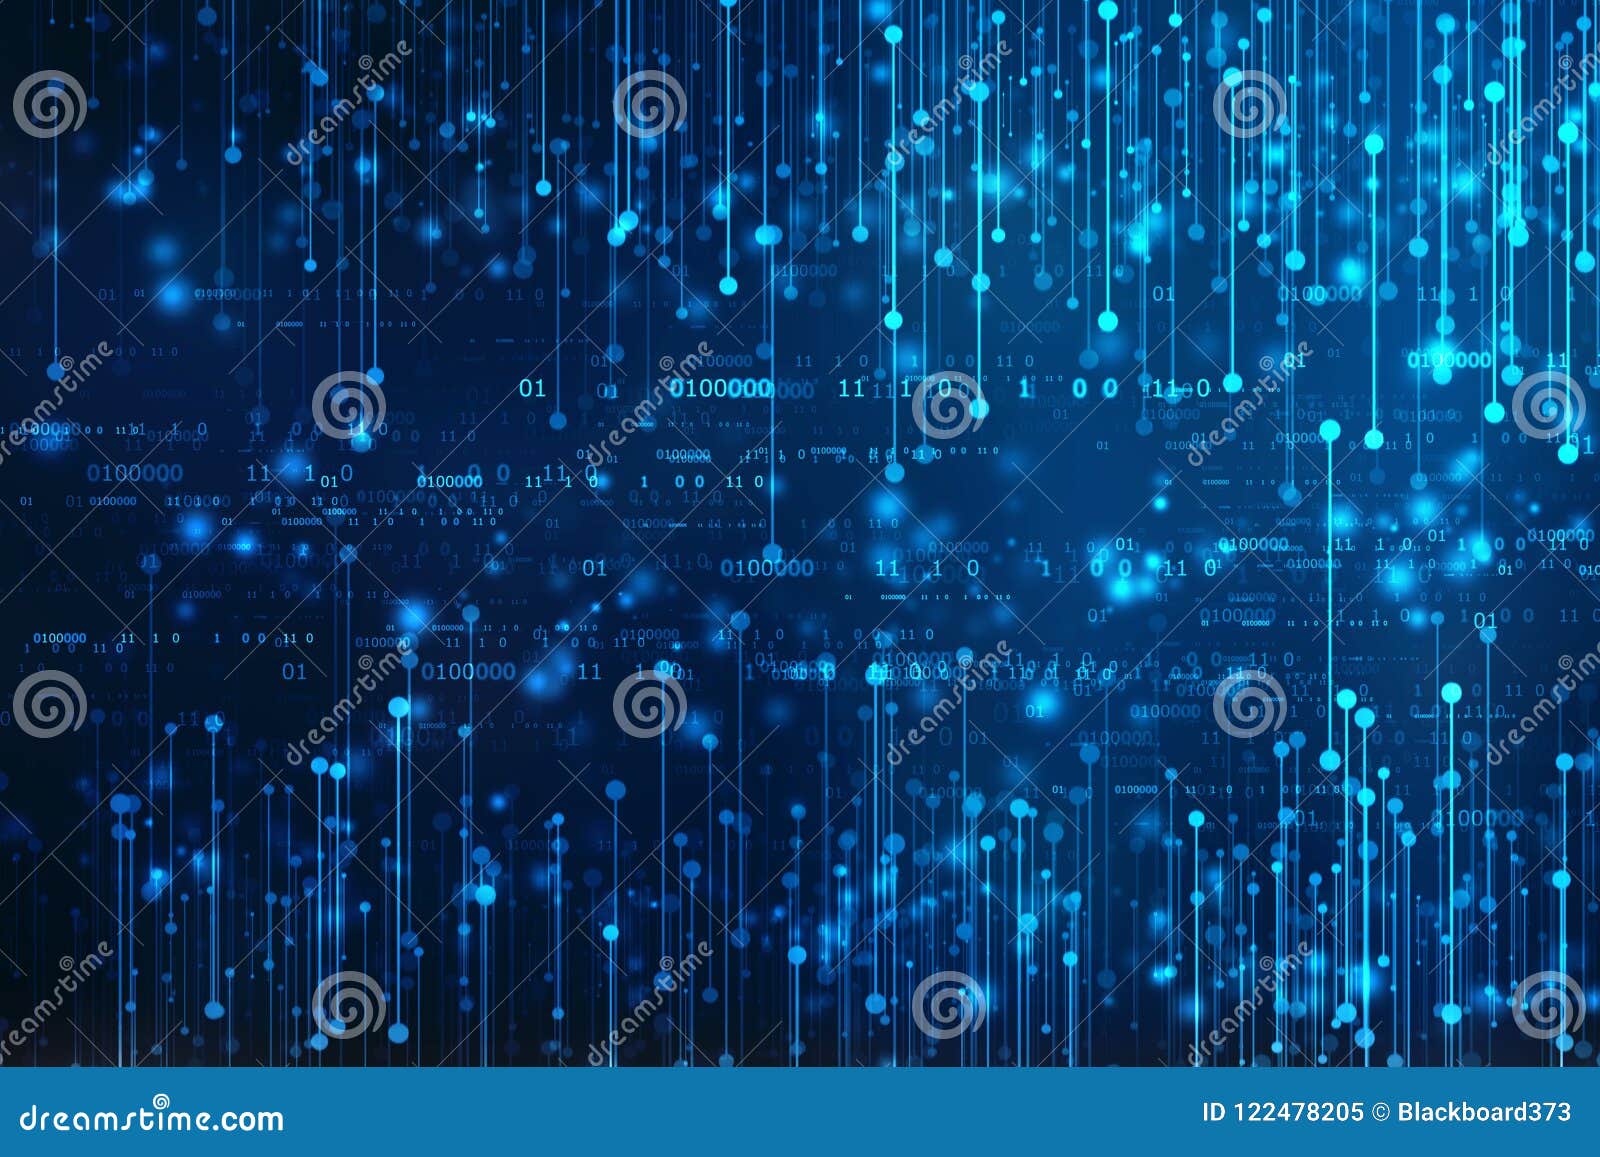 binary code background, digital abstract technology background